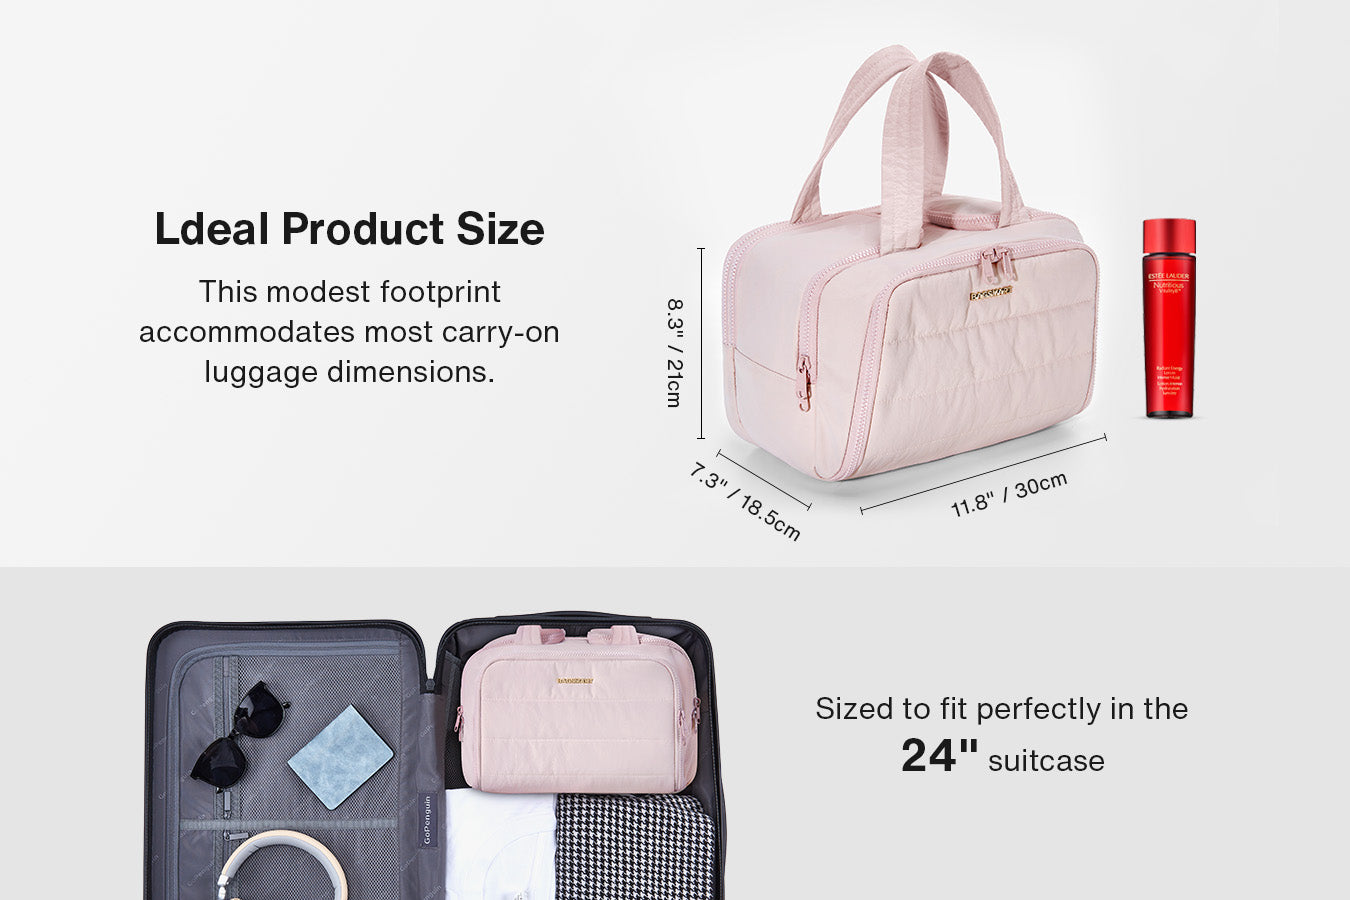 It is advisable to prioritize petite yet spacious toiletry bags